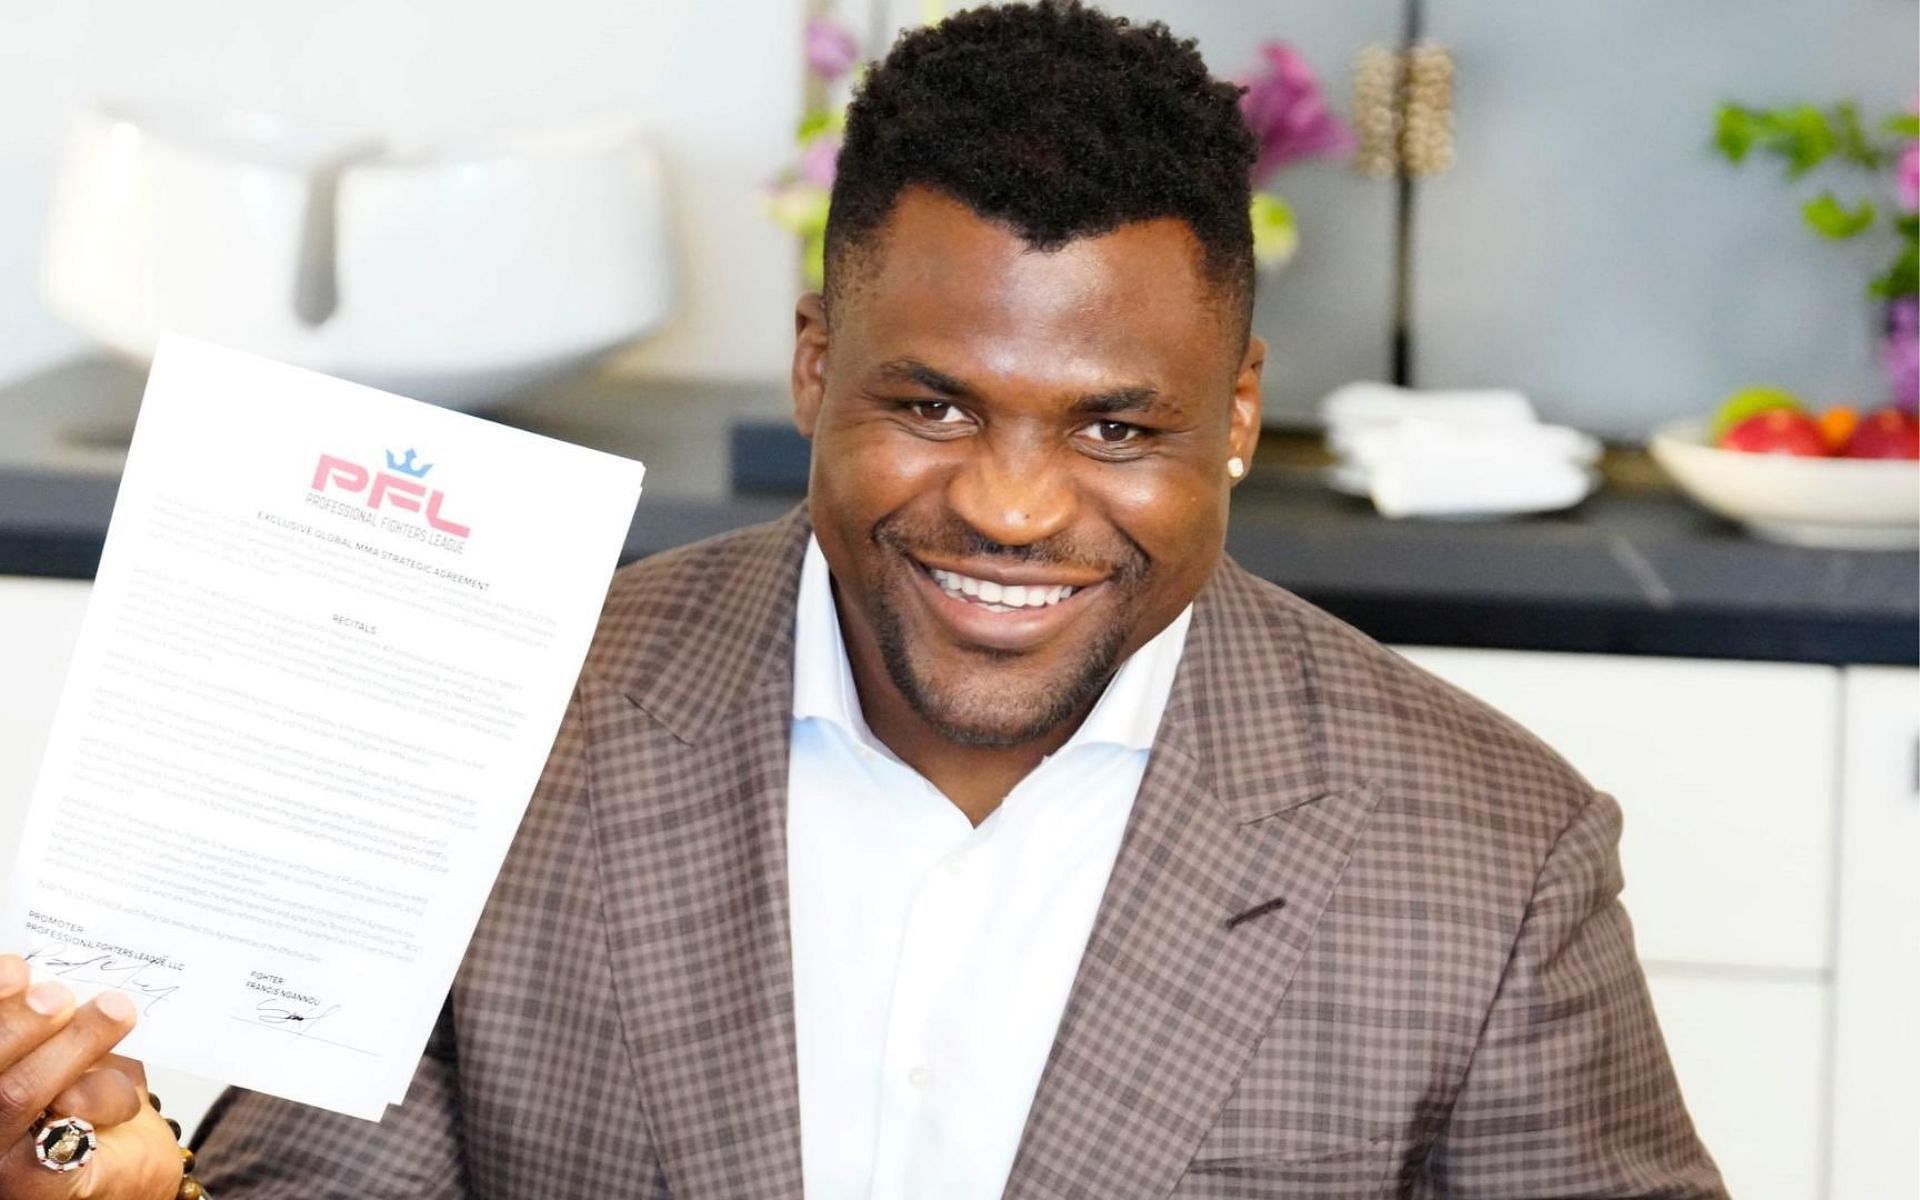 Francis Ngannou has signed a lucrative deal with PFL [Image credits: @spinninbackfist on Twitter]